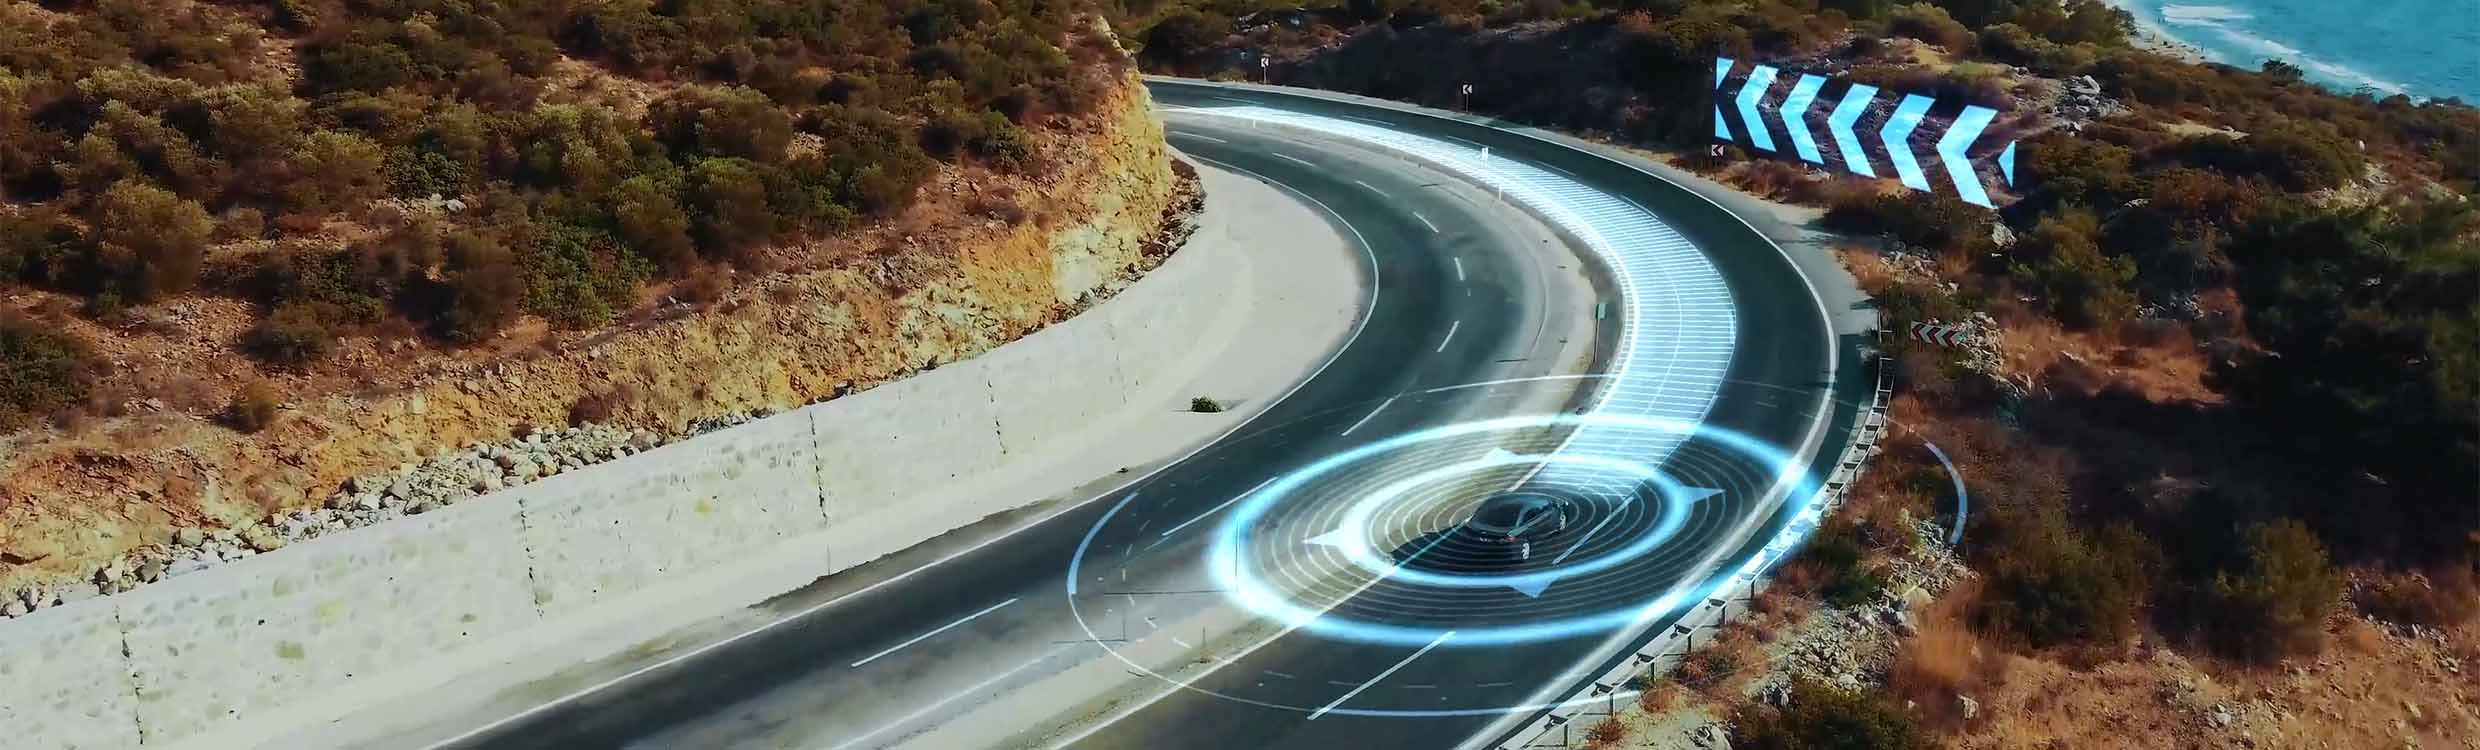 Vehicle on a curved road with navigation graphics